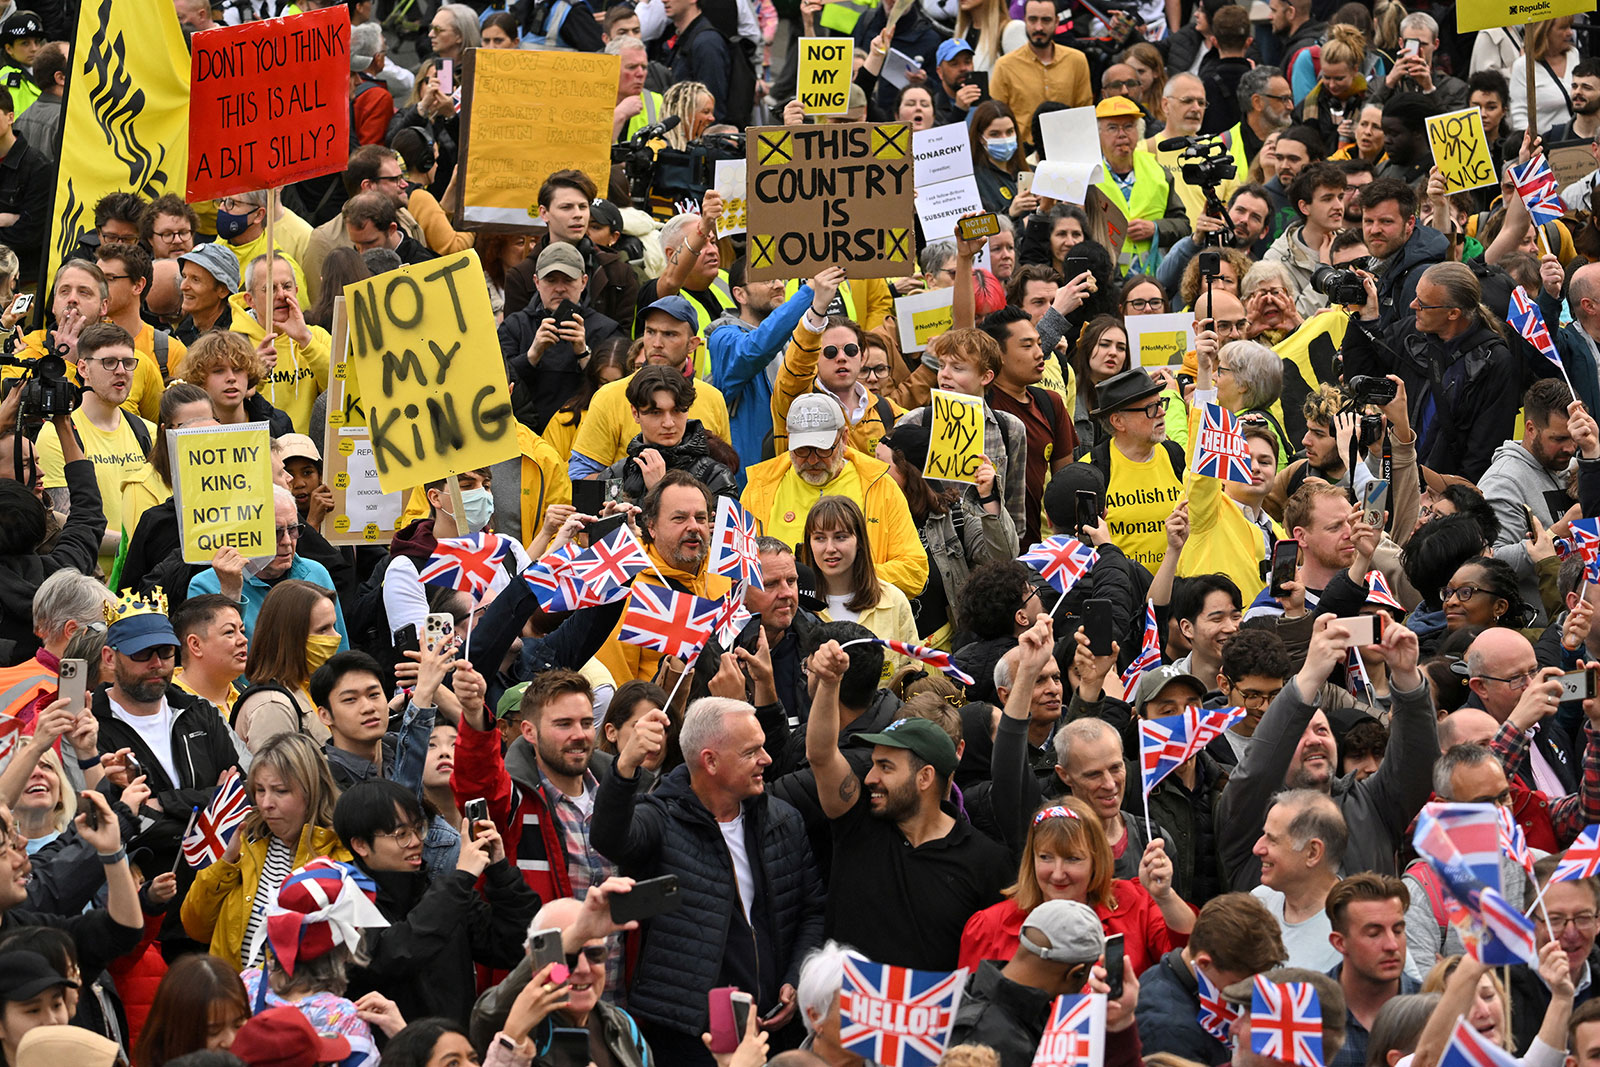 Anti-monarchy protesters hold up placards saying "Not My King" as they demonstrate in Trafalgar Square in London on May 6.